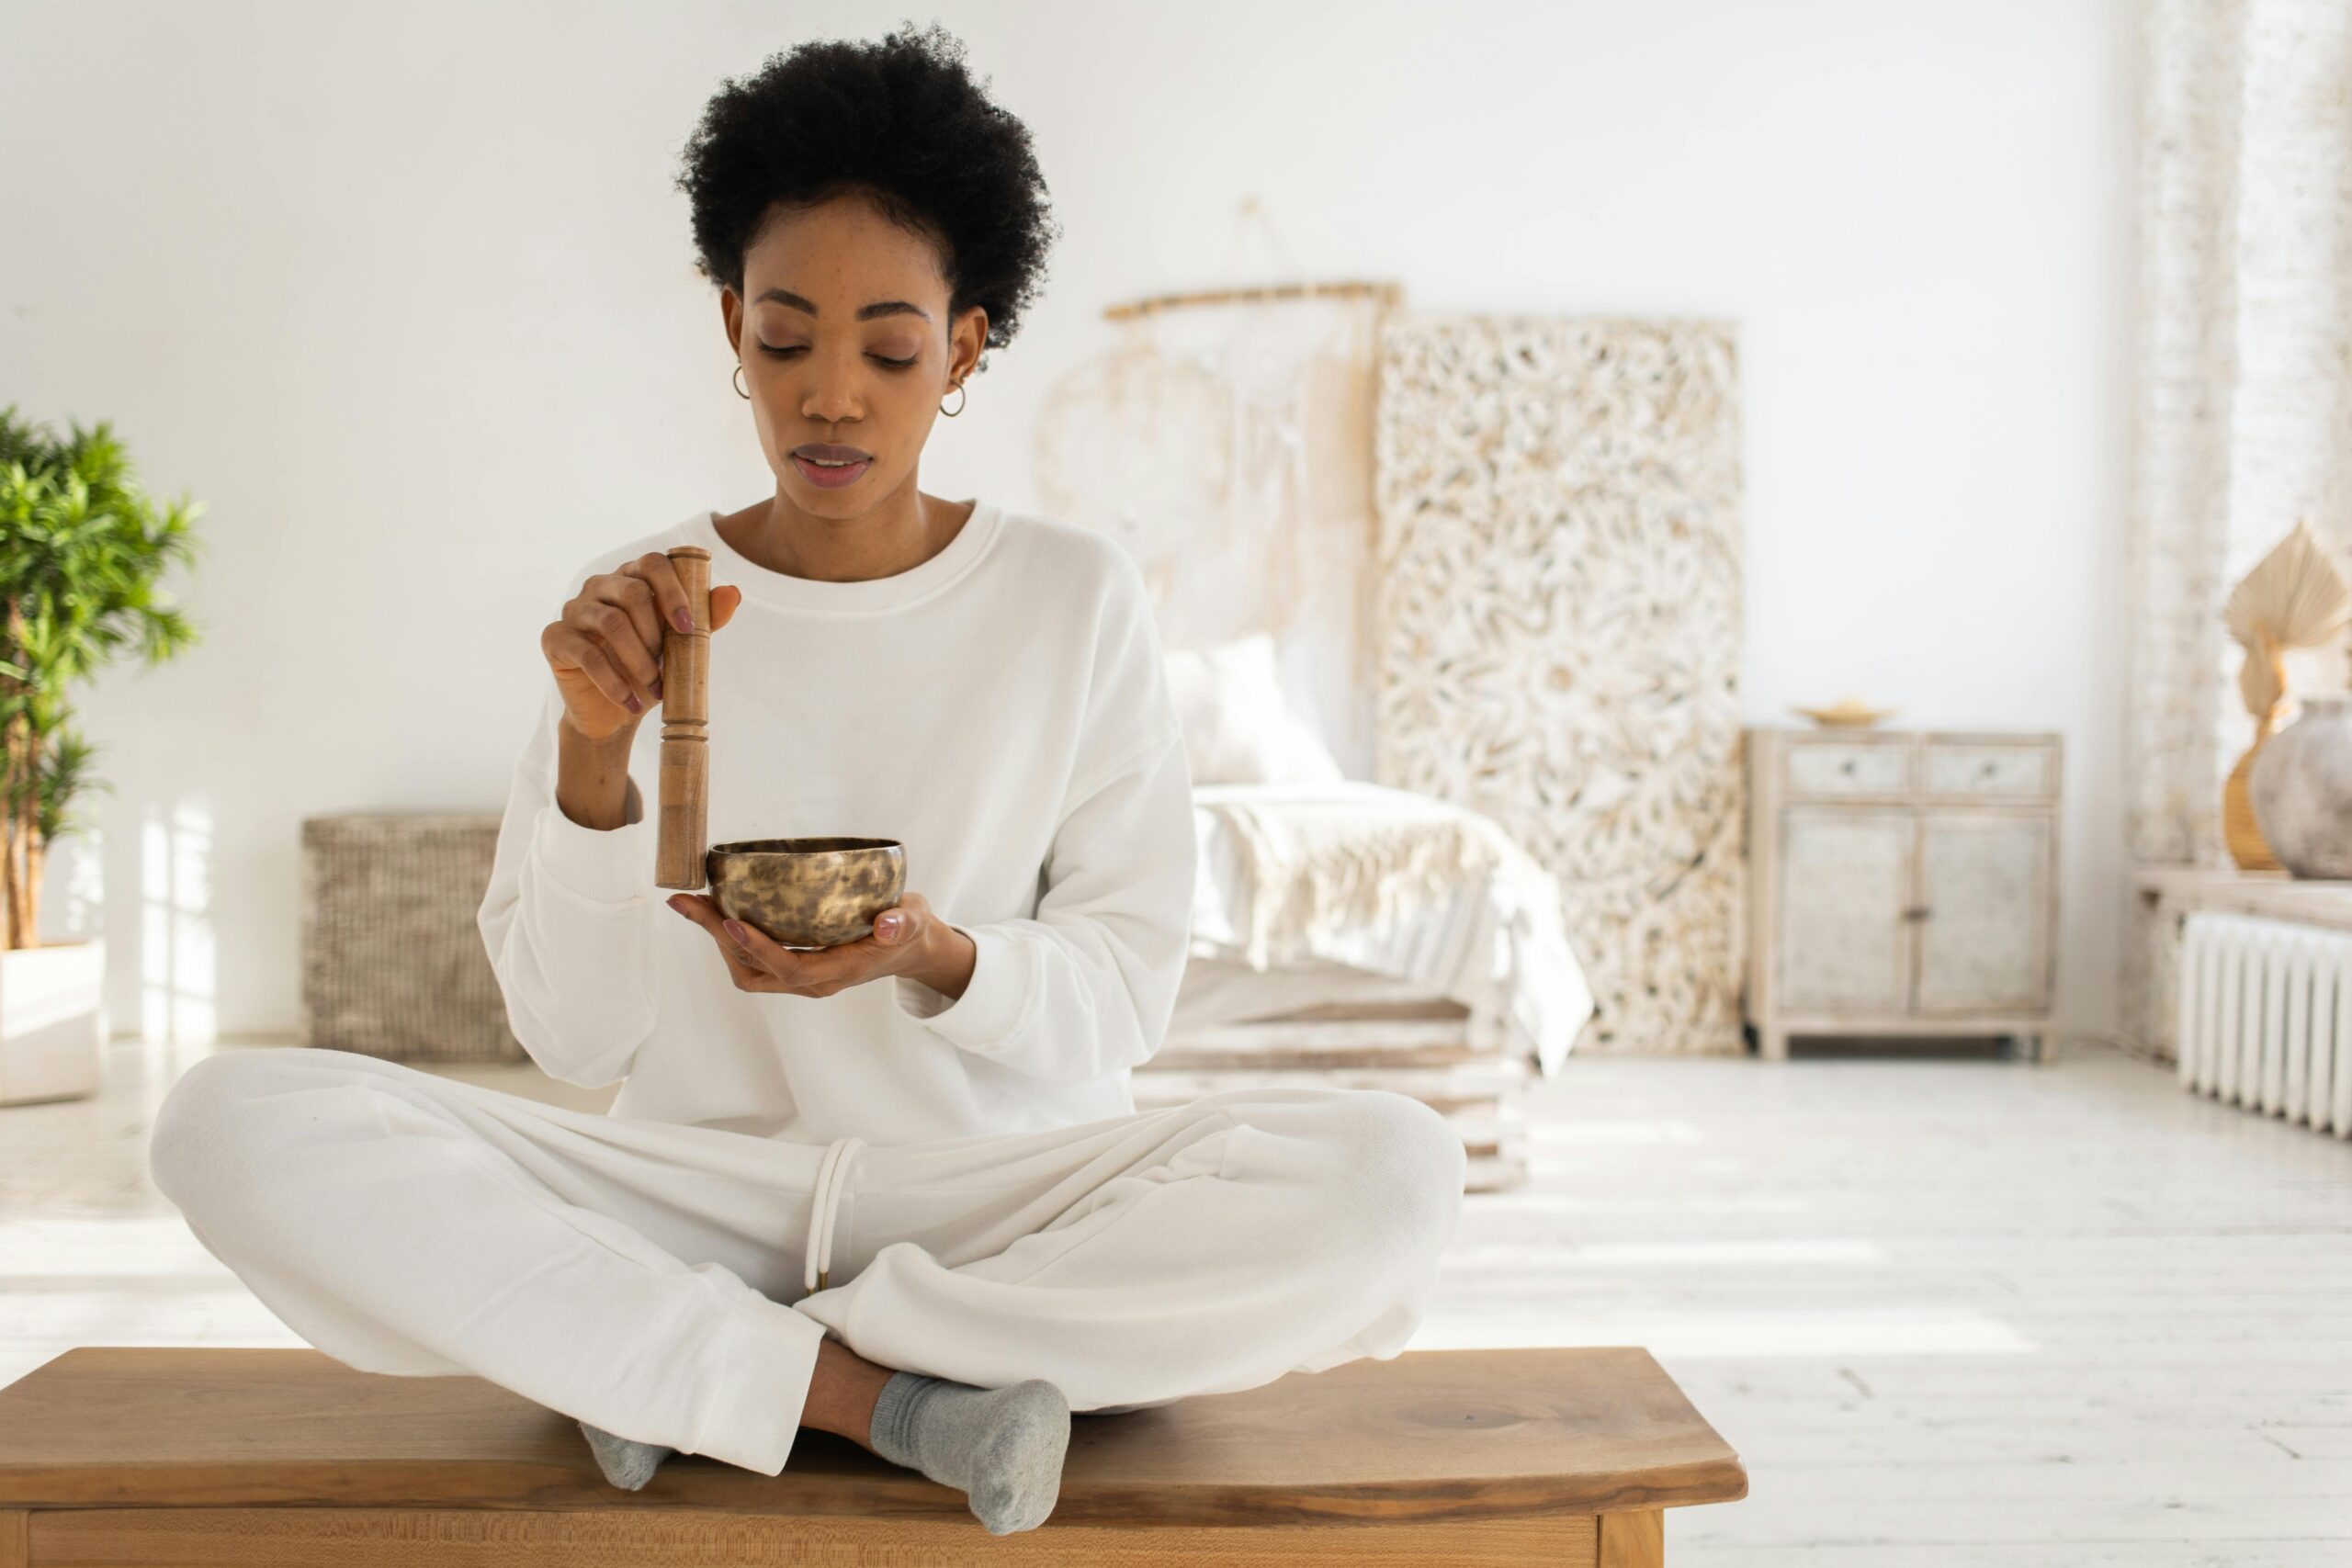 Check out some of the top retreats for a solo spring trip. 
Pictured: a Black woman using sound bowls for wellness 